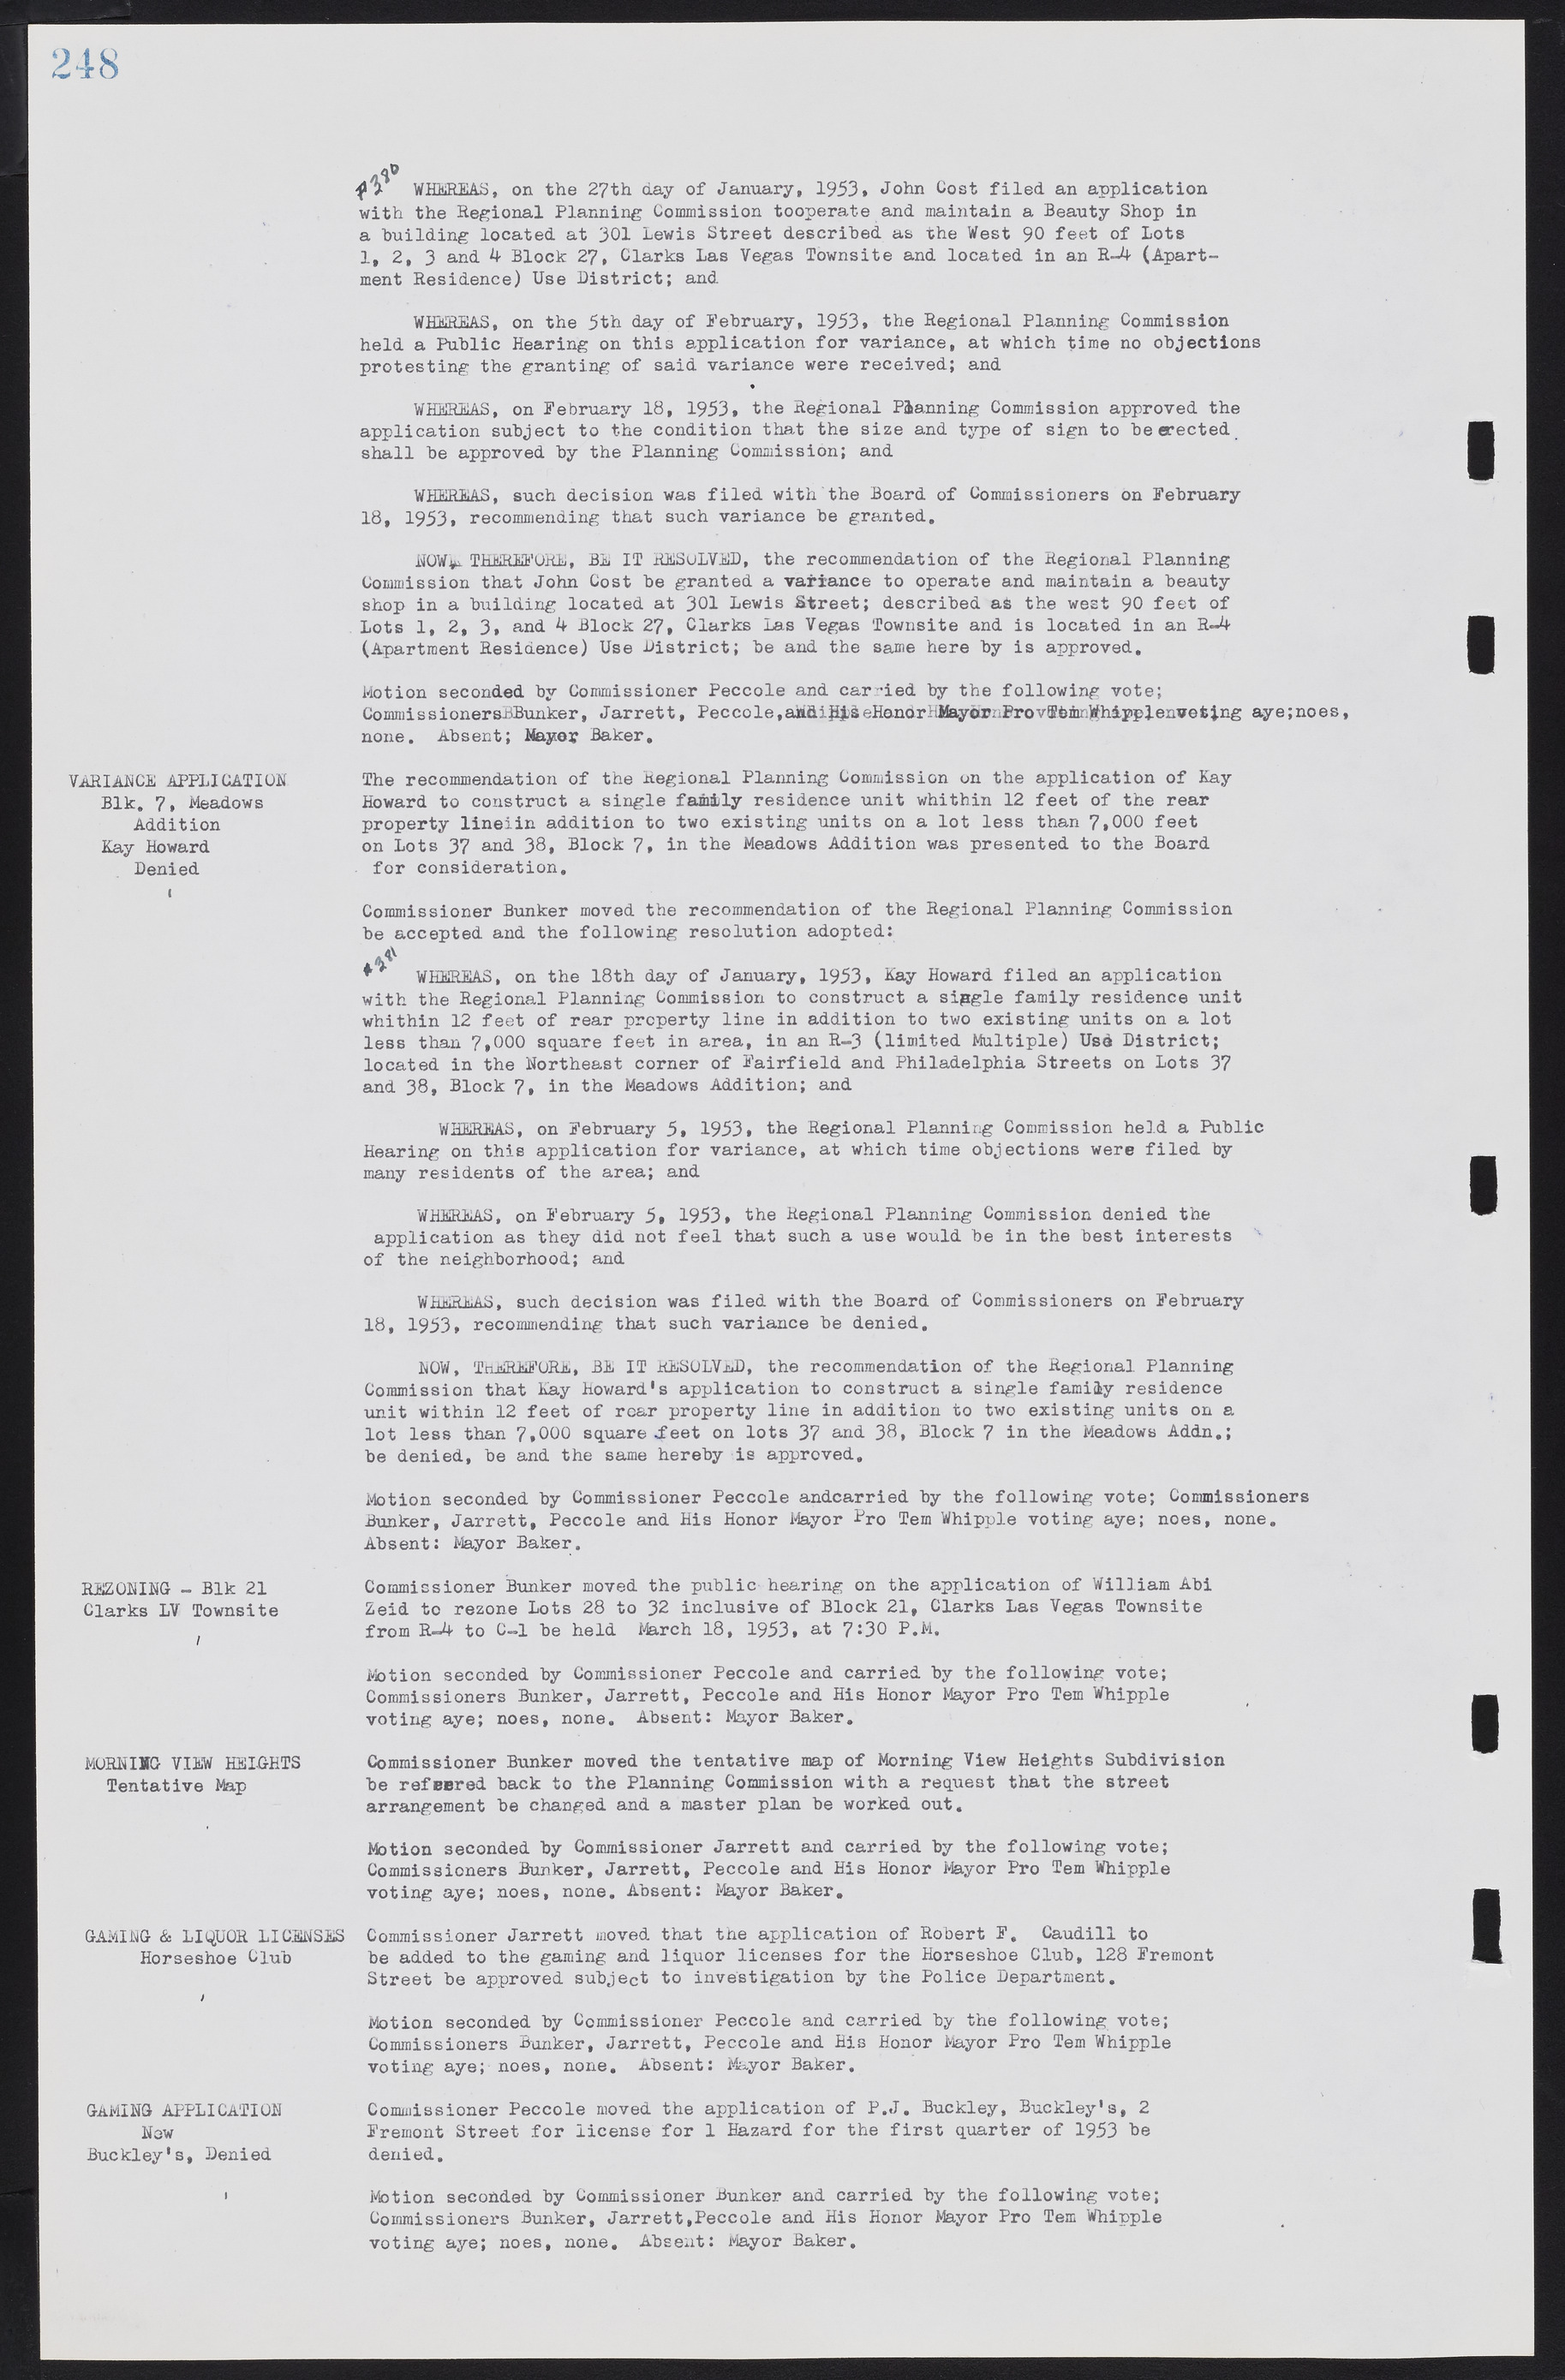 Las Vegas City Commission Minutes, May 26, 1952 to February 17, 1954, lvc000008-264